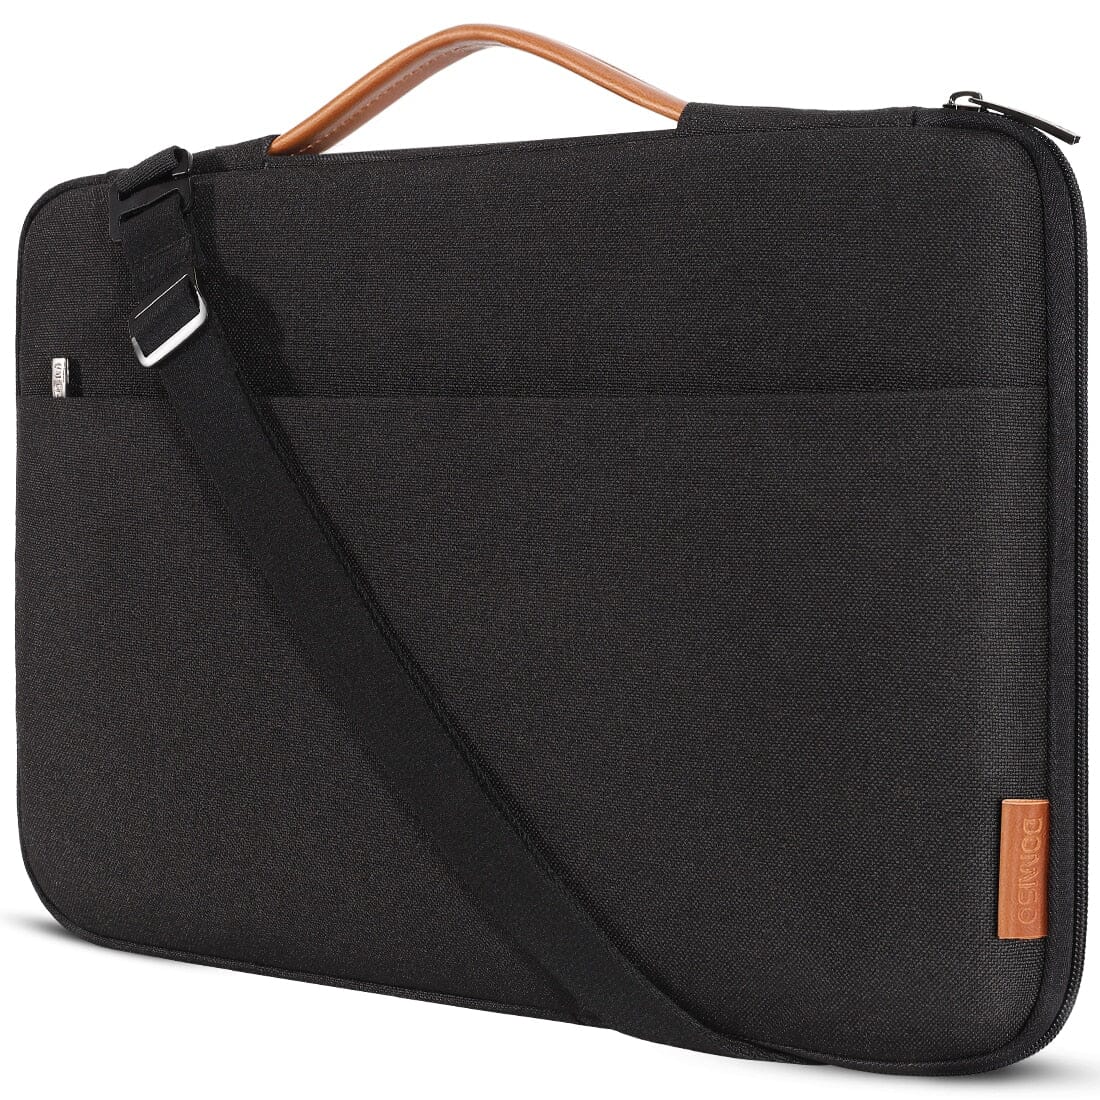 Laptop Messenger Bag 15.6 inch The Store Bags Black 15.6-inch 